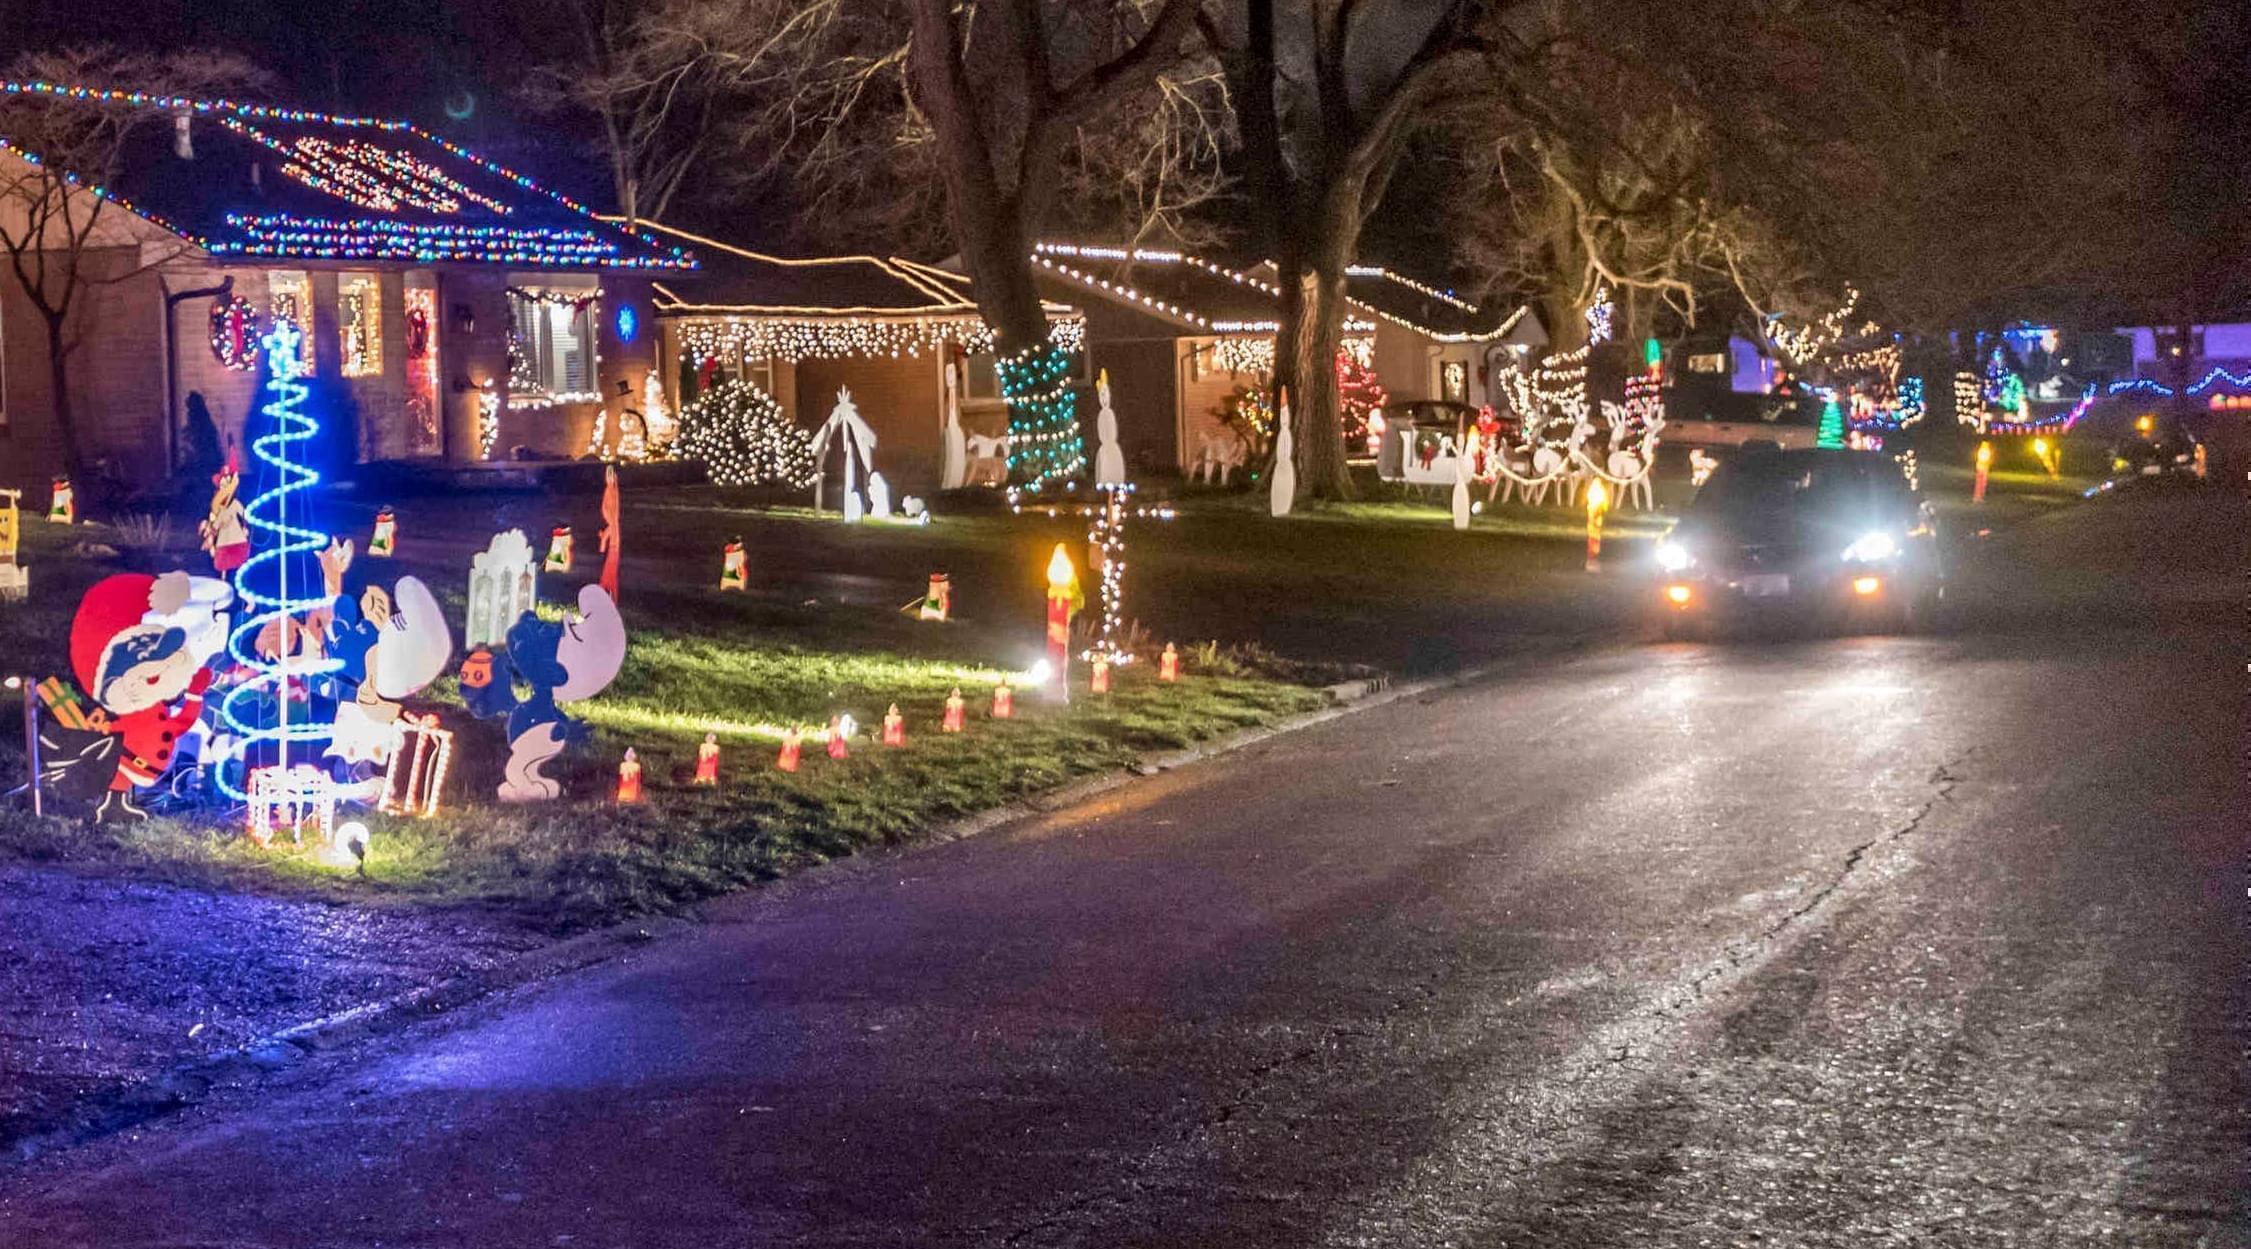 Homes in one east Urbana neighborhood celebrate the holidays along the route known as Candlestick Lane in 2015.